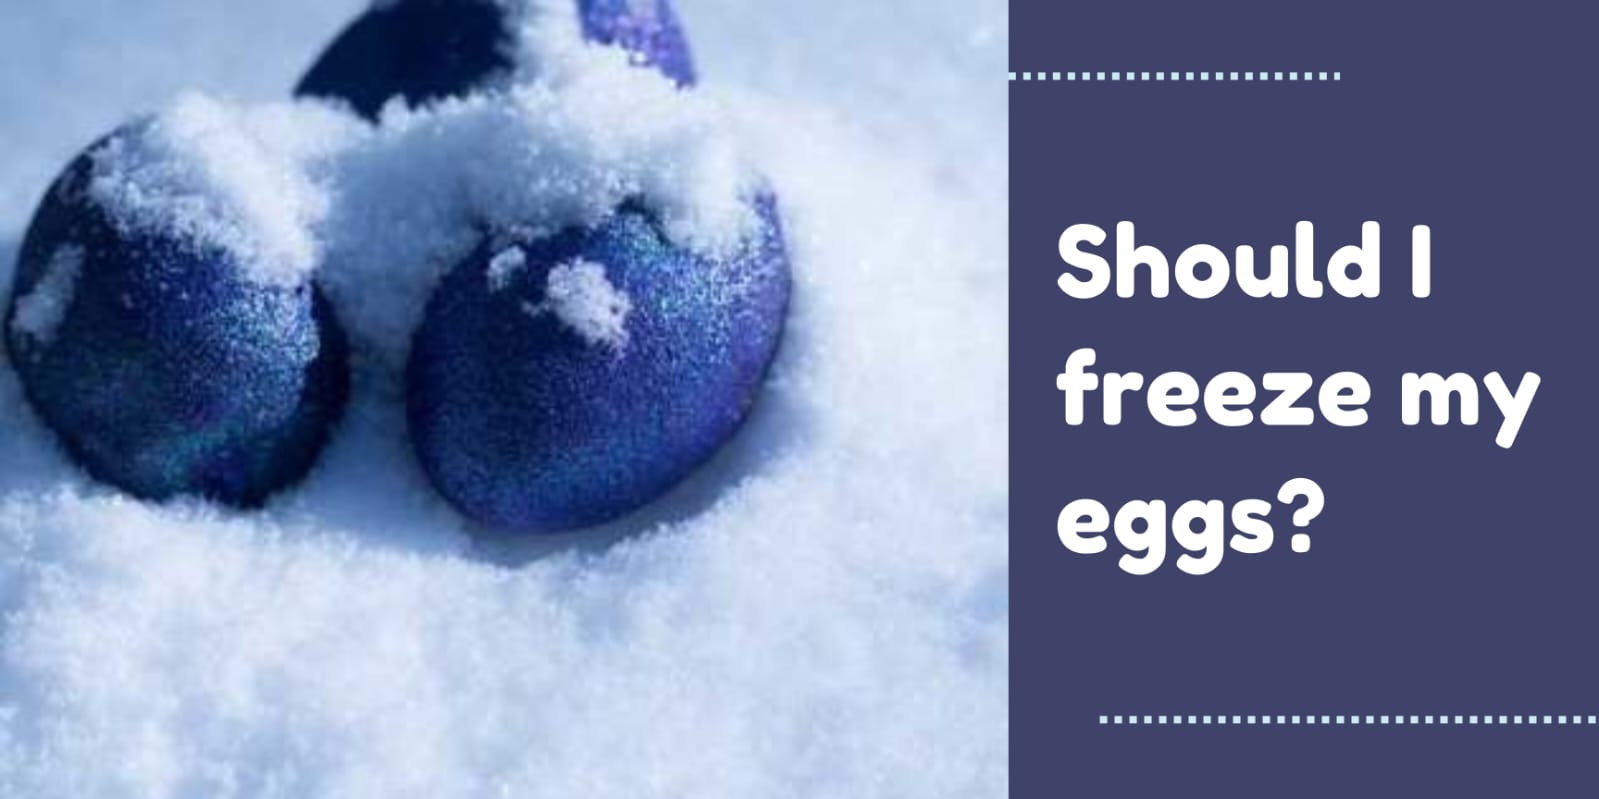 At what age should I freeze my eggs?